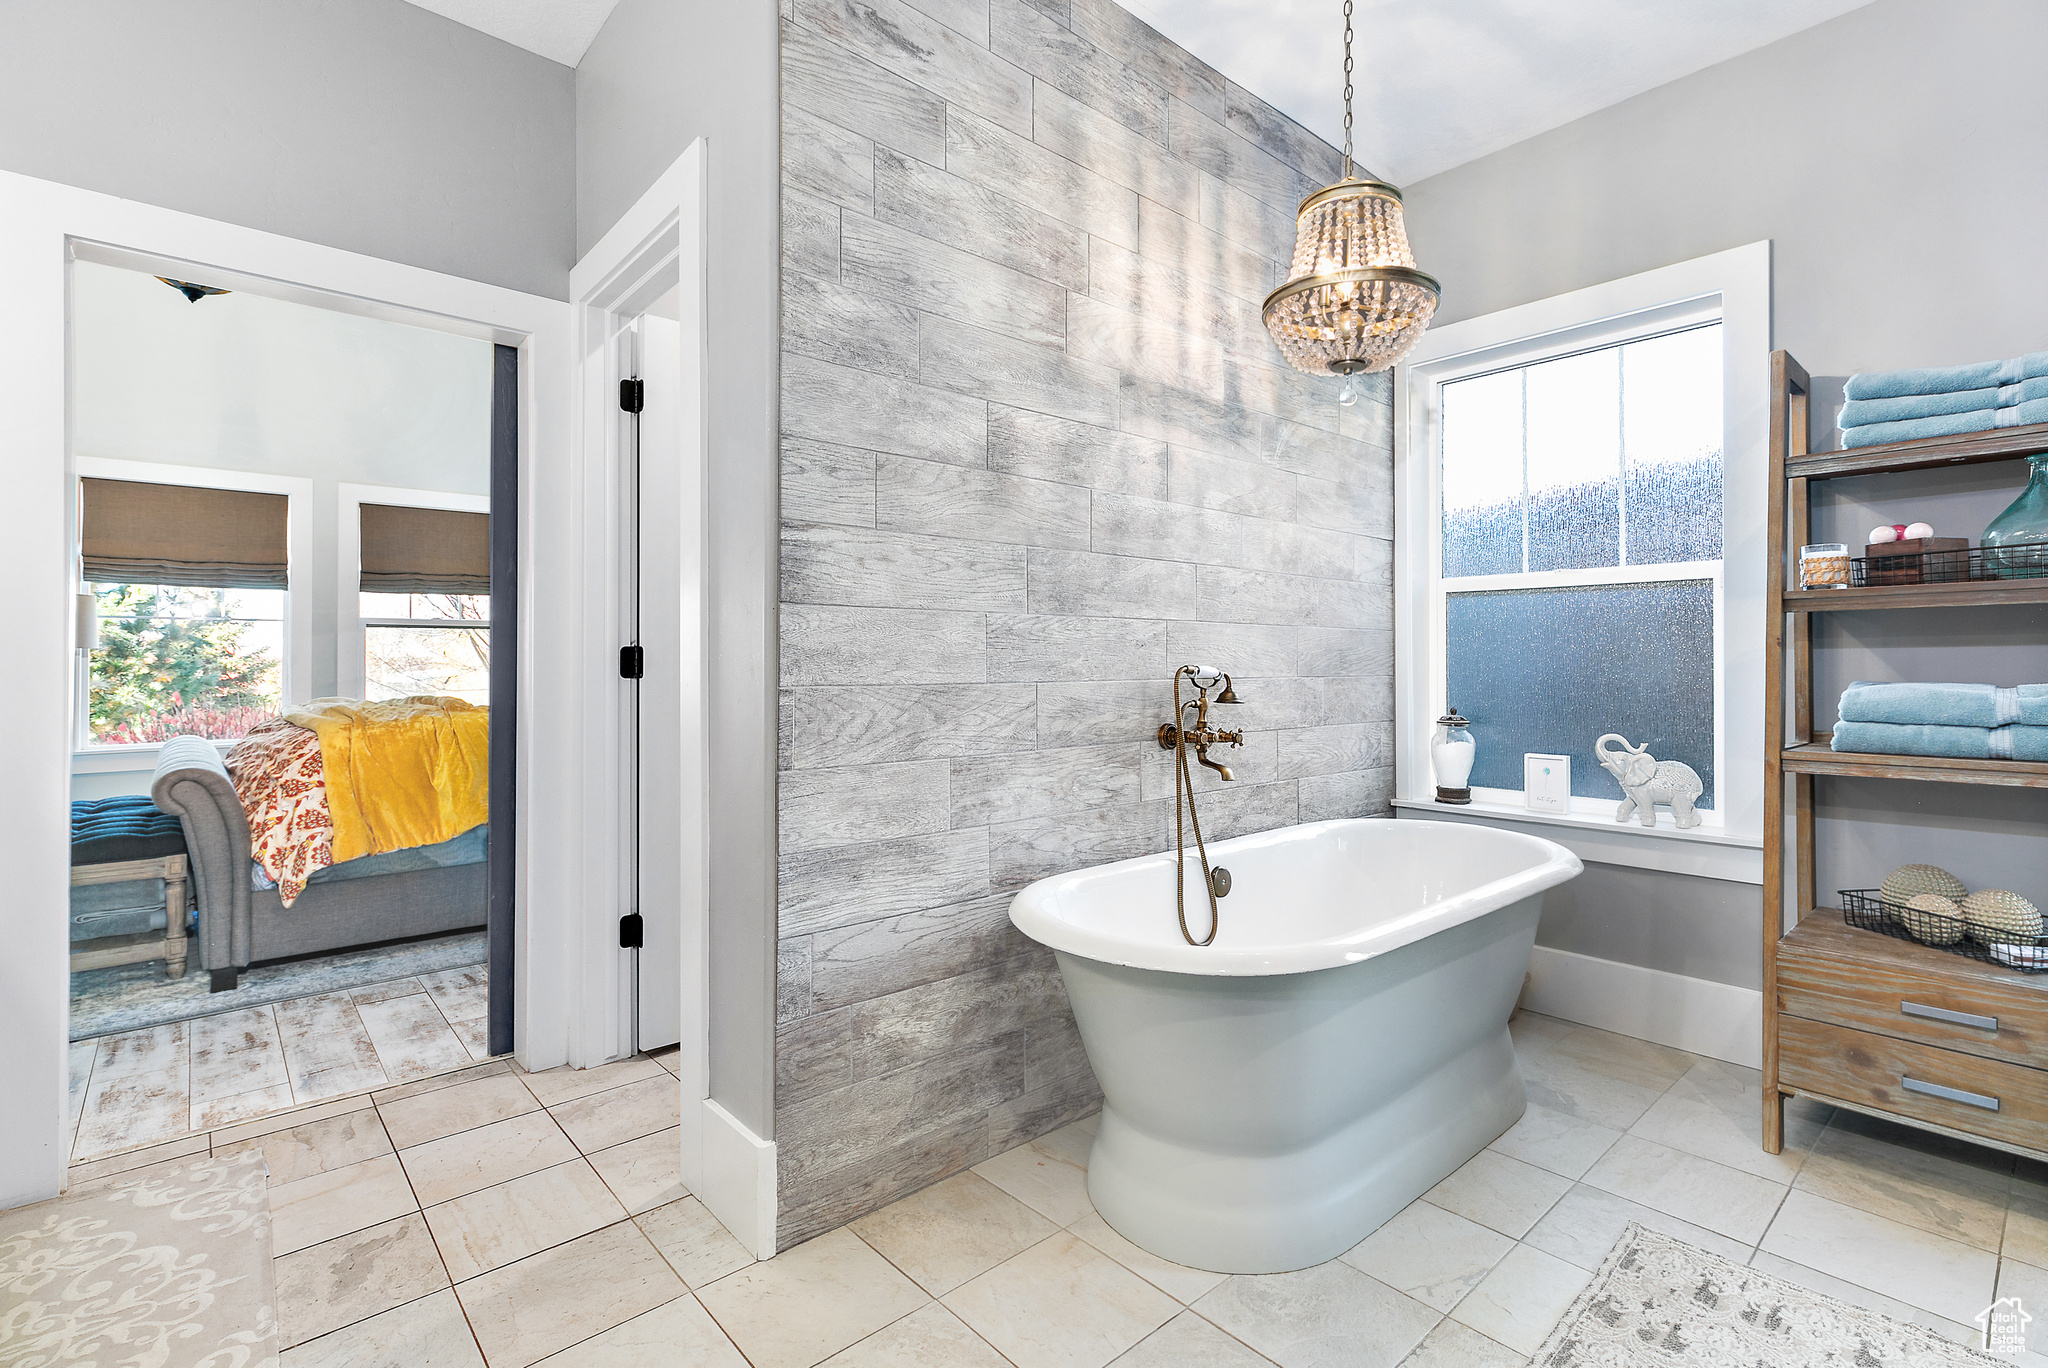 Primary Bathroom featuring tile walls, a bath to relax in, tile floors, and an inviting chandelier